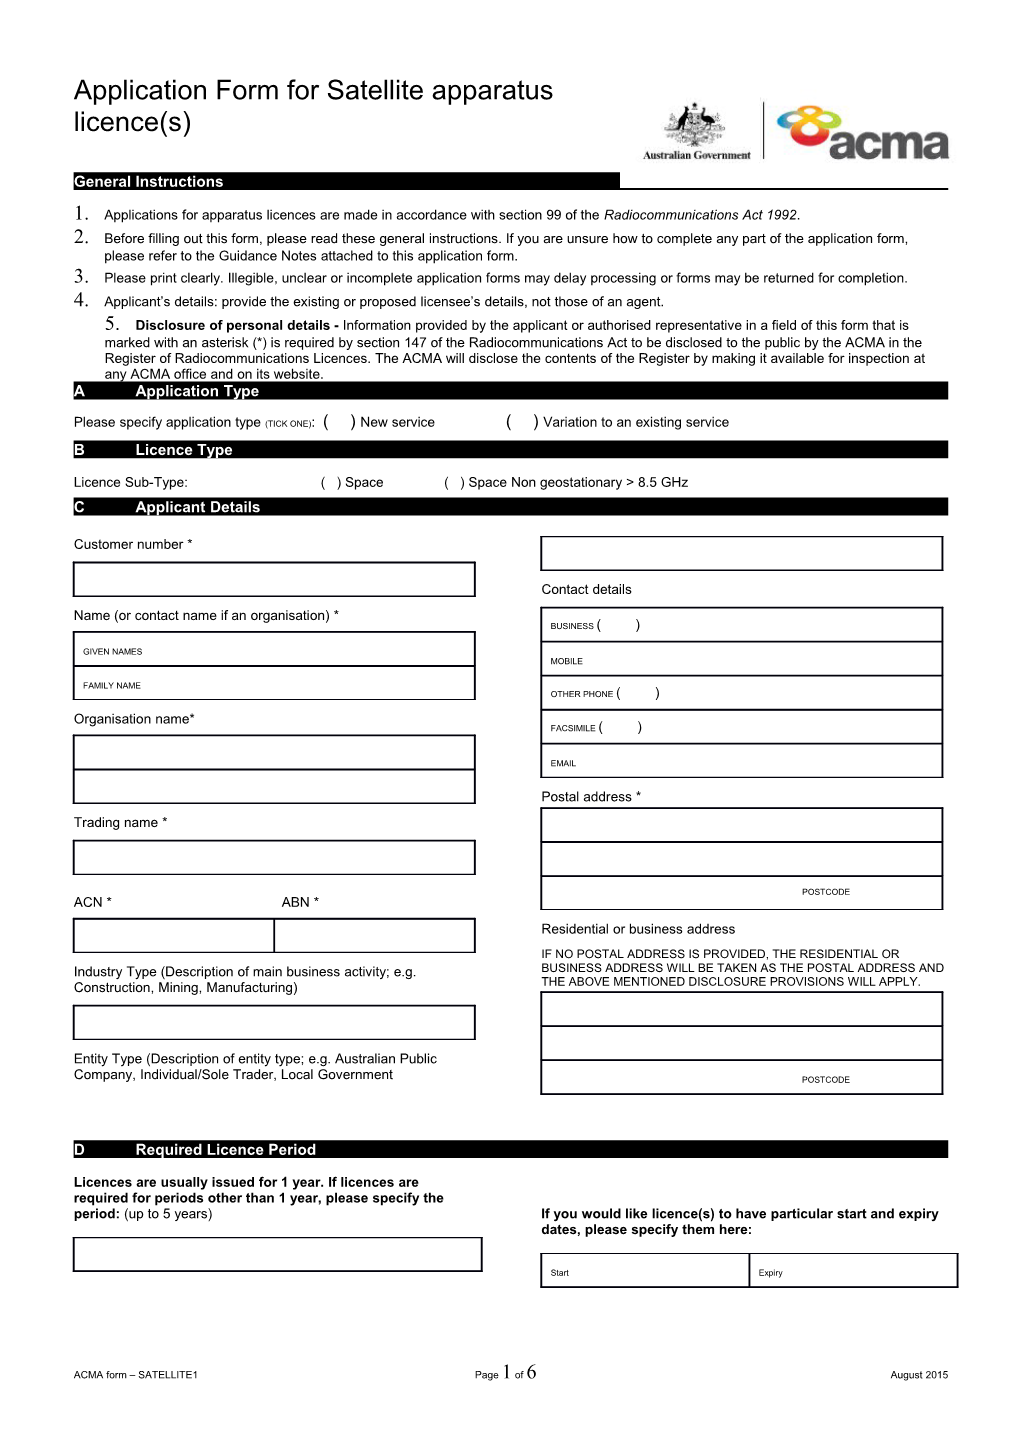 ACMA Form Satellite1page 1 of 4August 2015